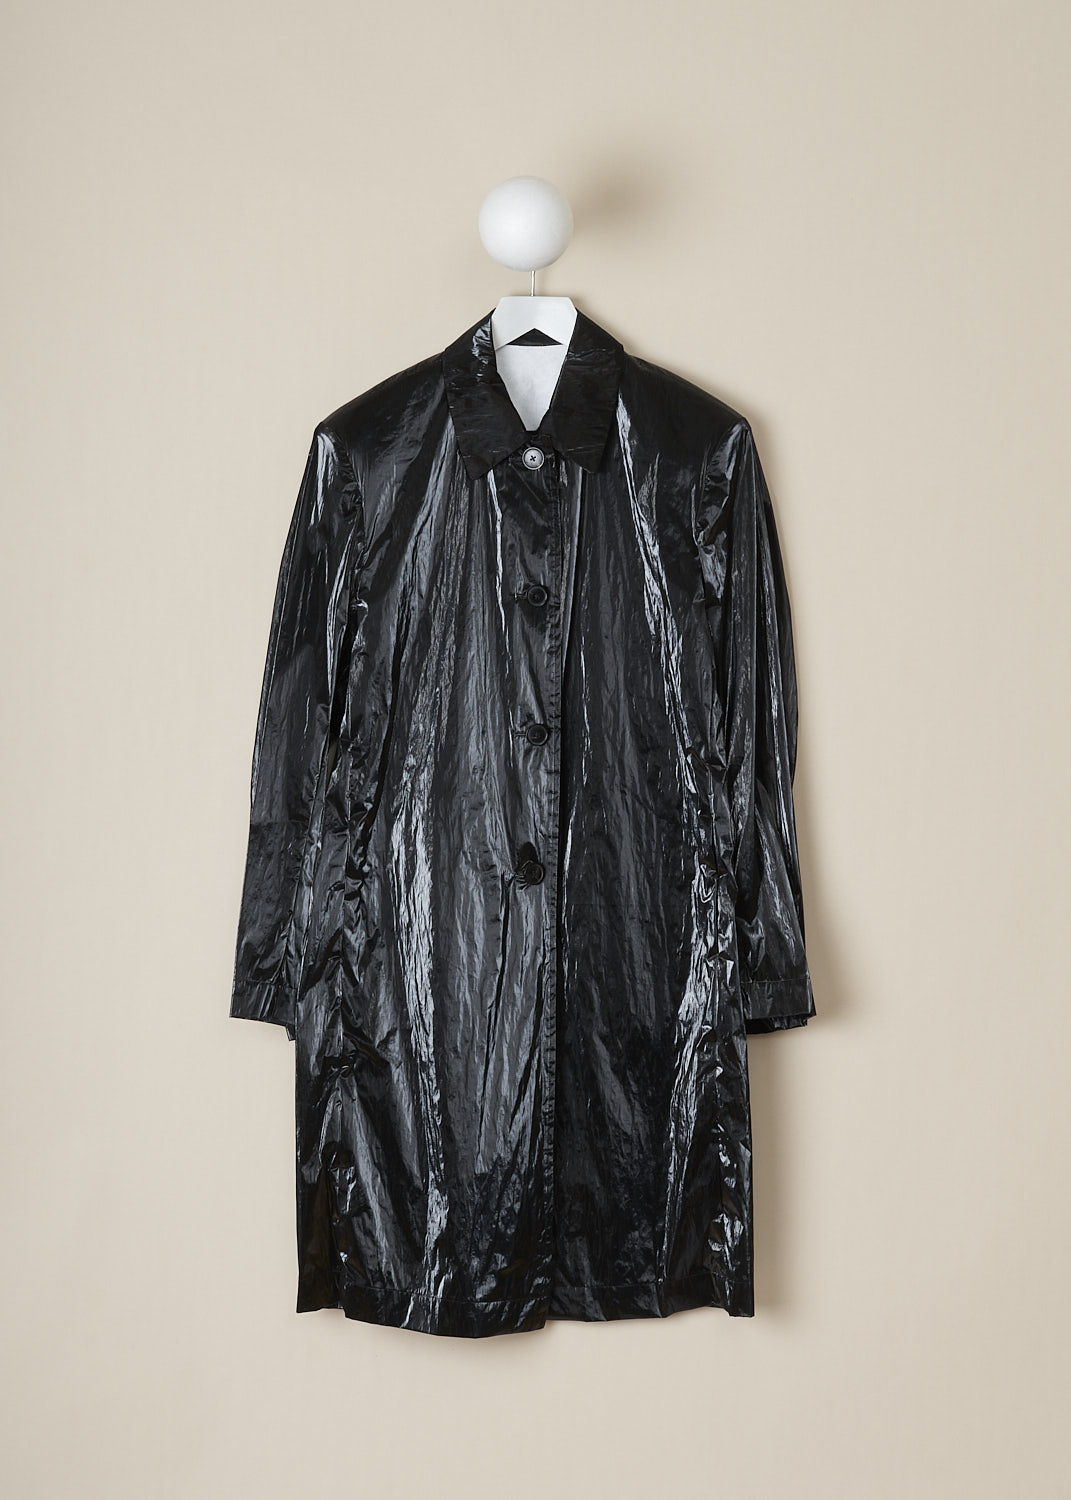 DRIES VAN NOTEN, GLOSSY BLACK COAT, ROXAN_2158_WW_COAT_BLA, Black, Front, This glossy black coat features a spread collar, a front button closure and padded shoulders. The coat has slanted pockets. The hemline is straight.  
